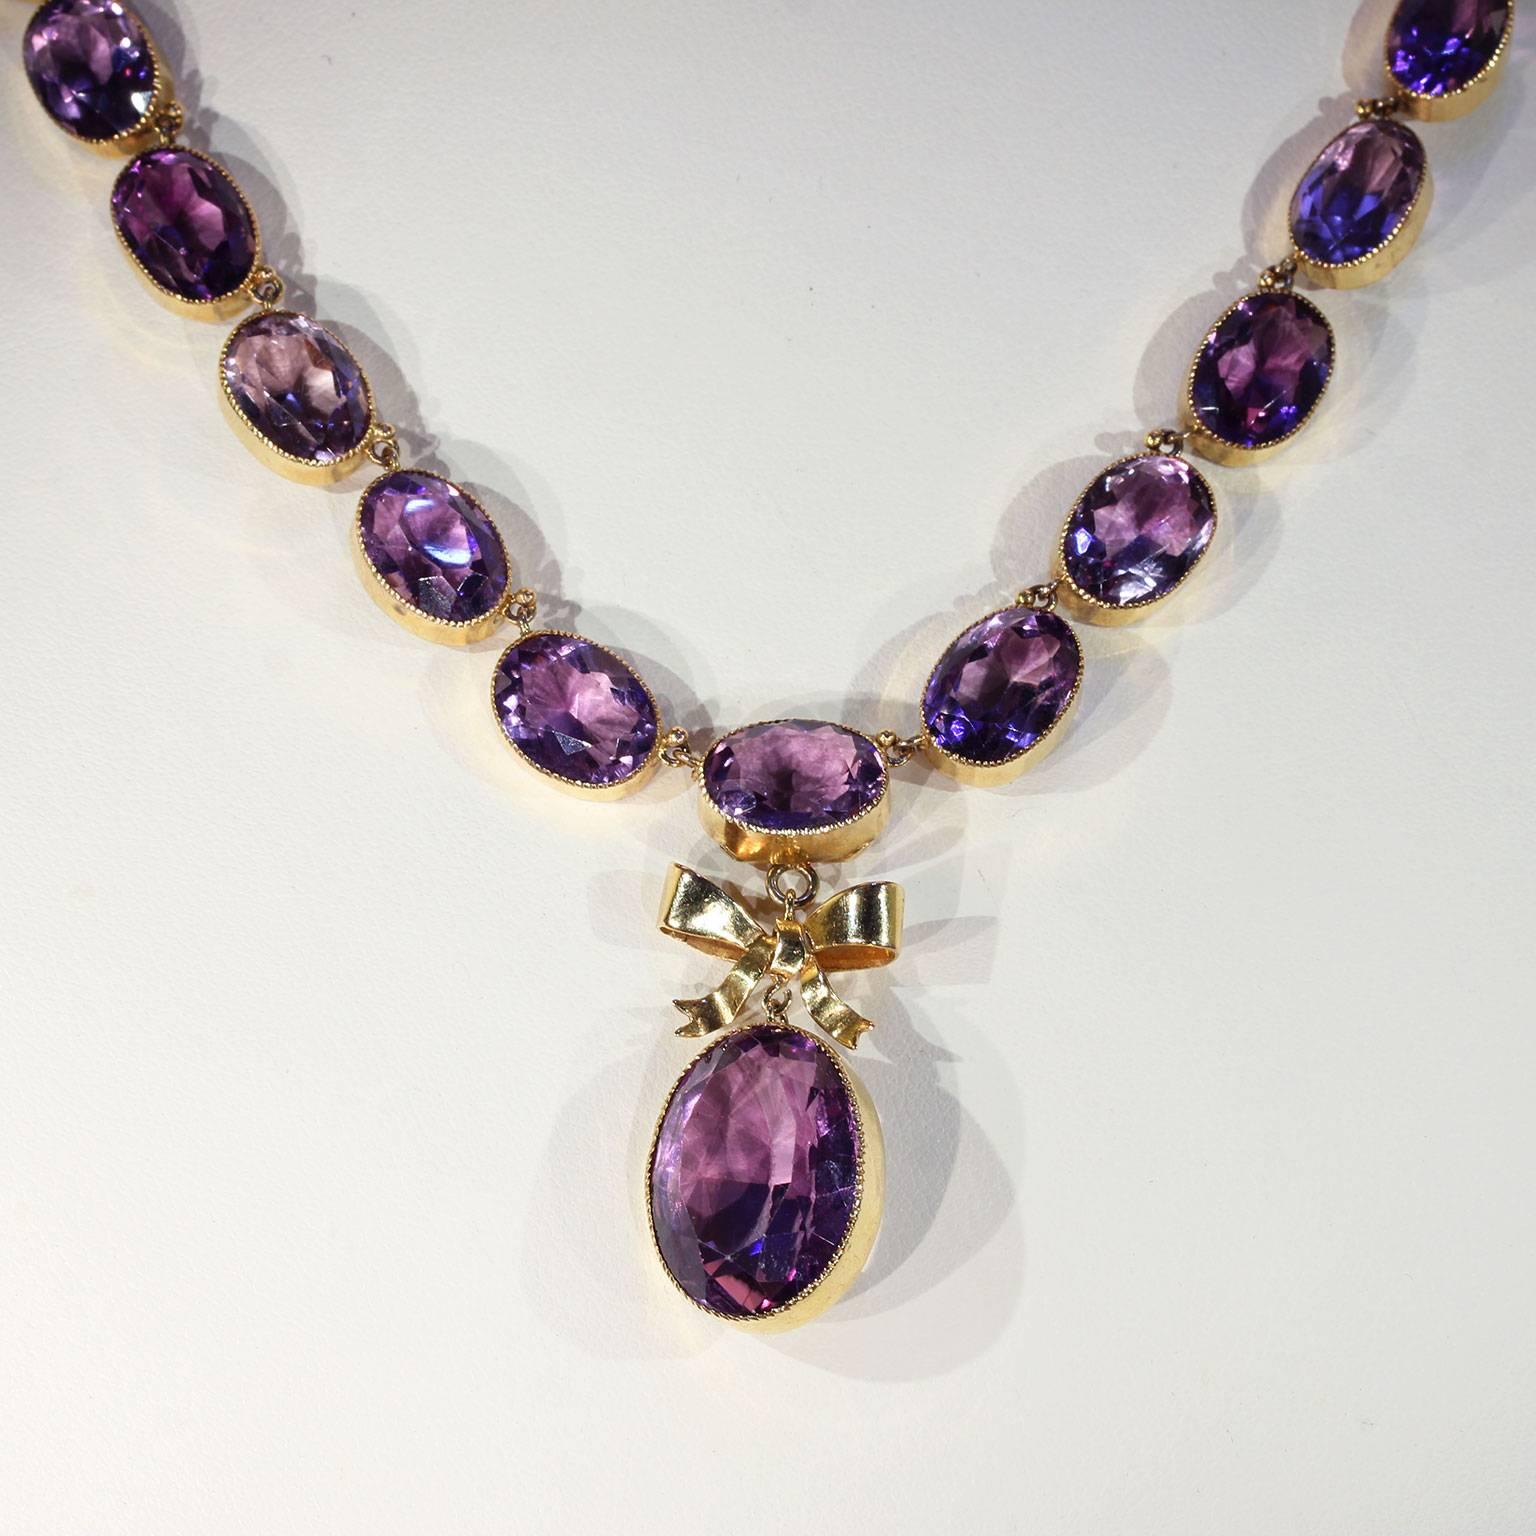 This antique Victorian amethyst gold necklace was handcrafted in England around 1900. It showcases 36 oval faceted amethysts set in 15 karat gold. The 35 stones around the neck are graduated and there is a large drop which hangs from a golden bow.